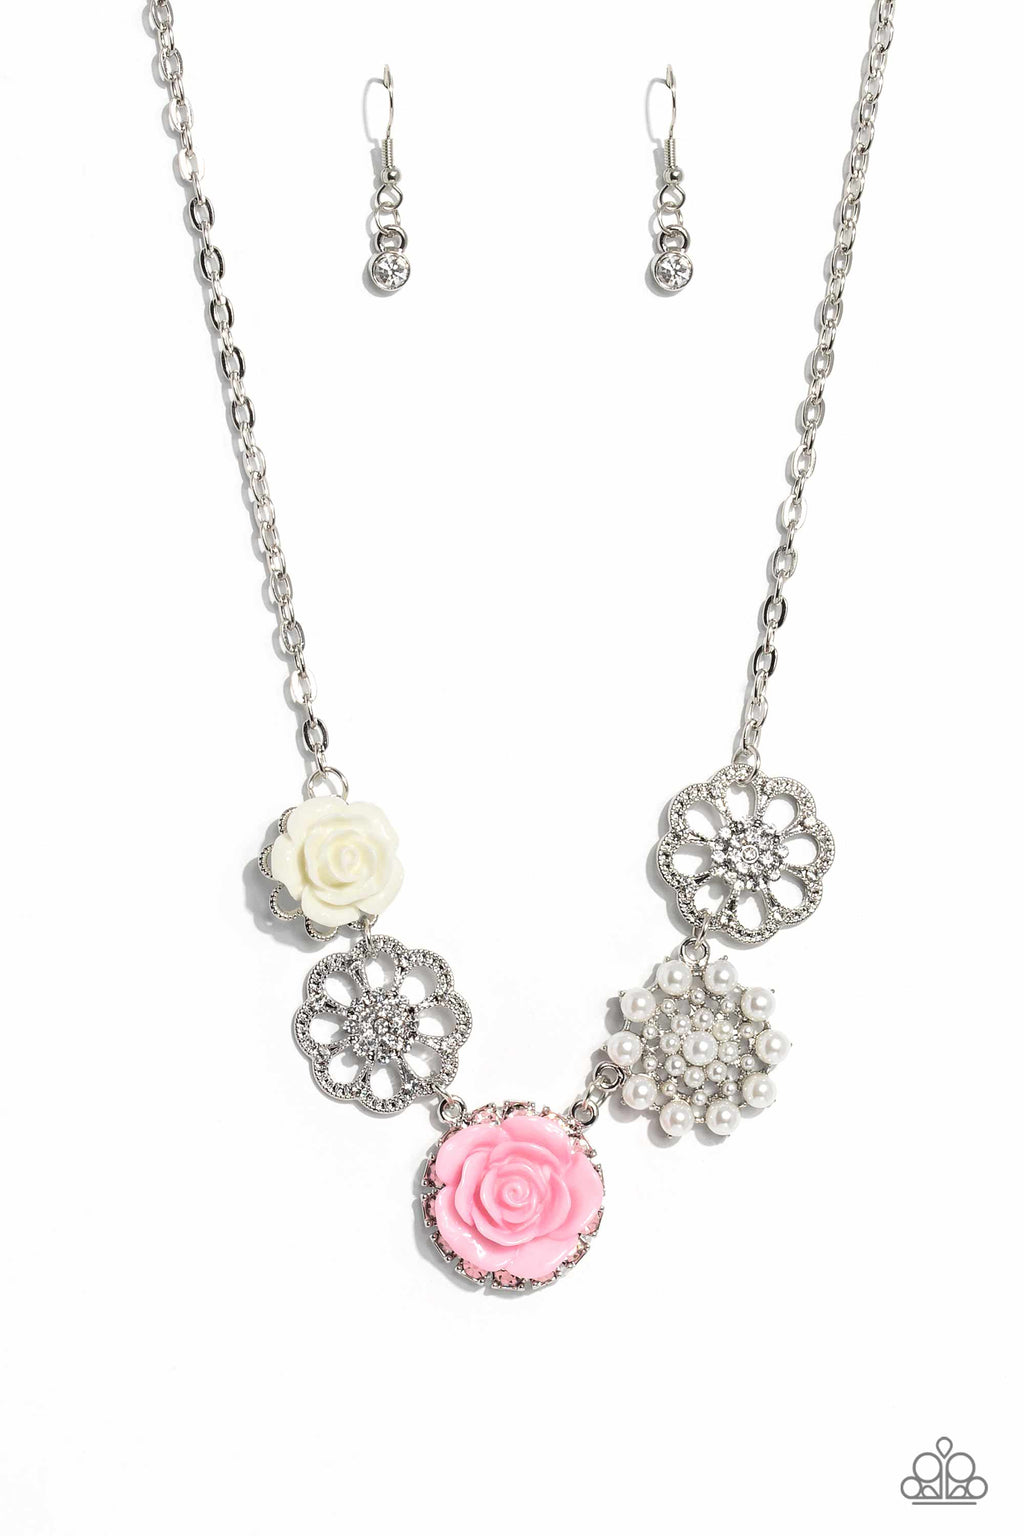 five-dollar-jewelry-tea-party-favors-pink-necklace-paparazzi-accessories